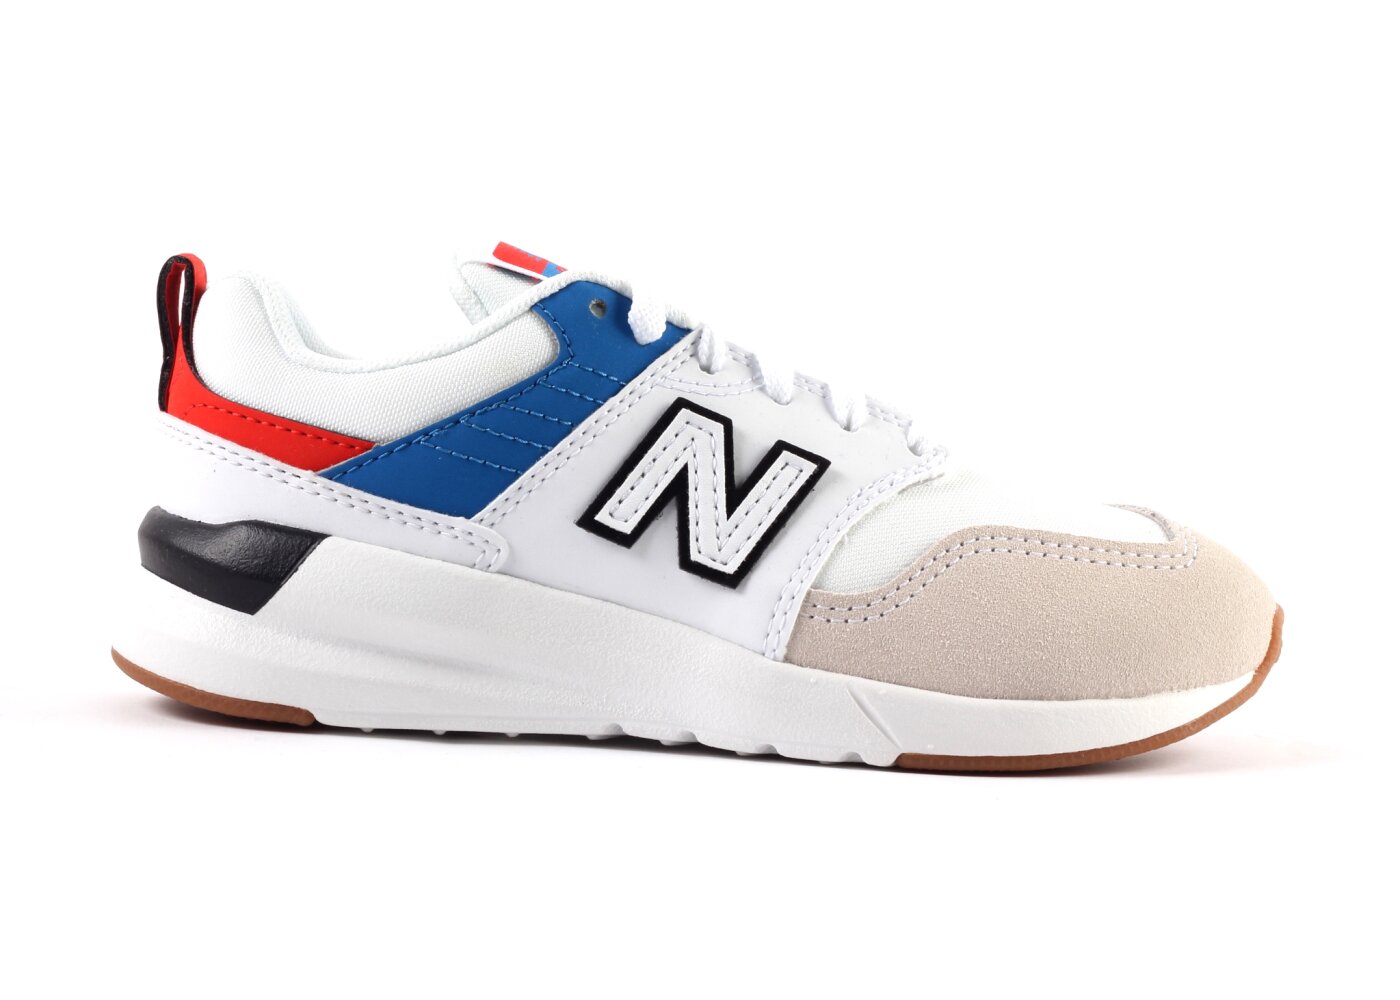 new balance sneakers kind